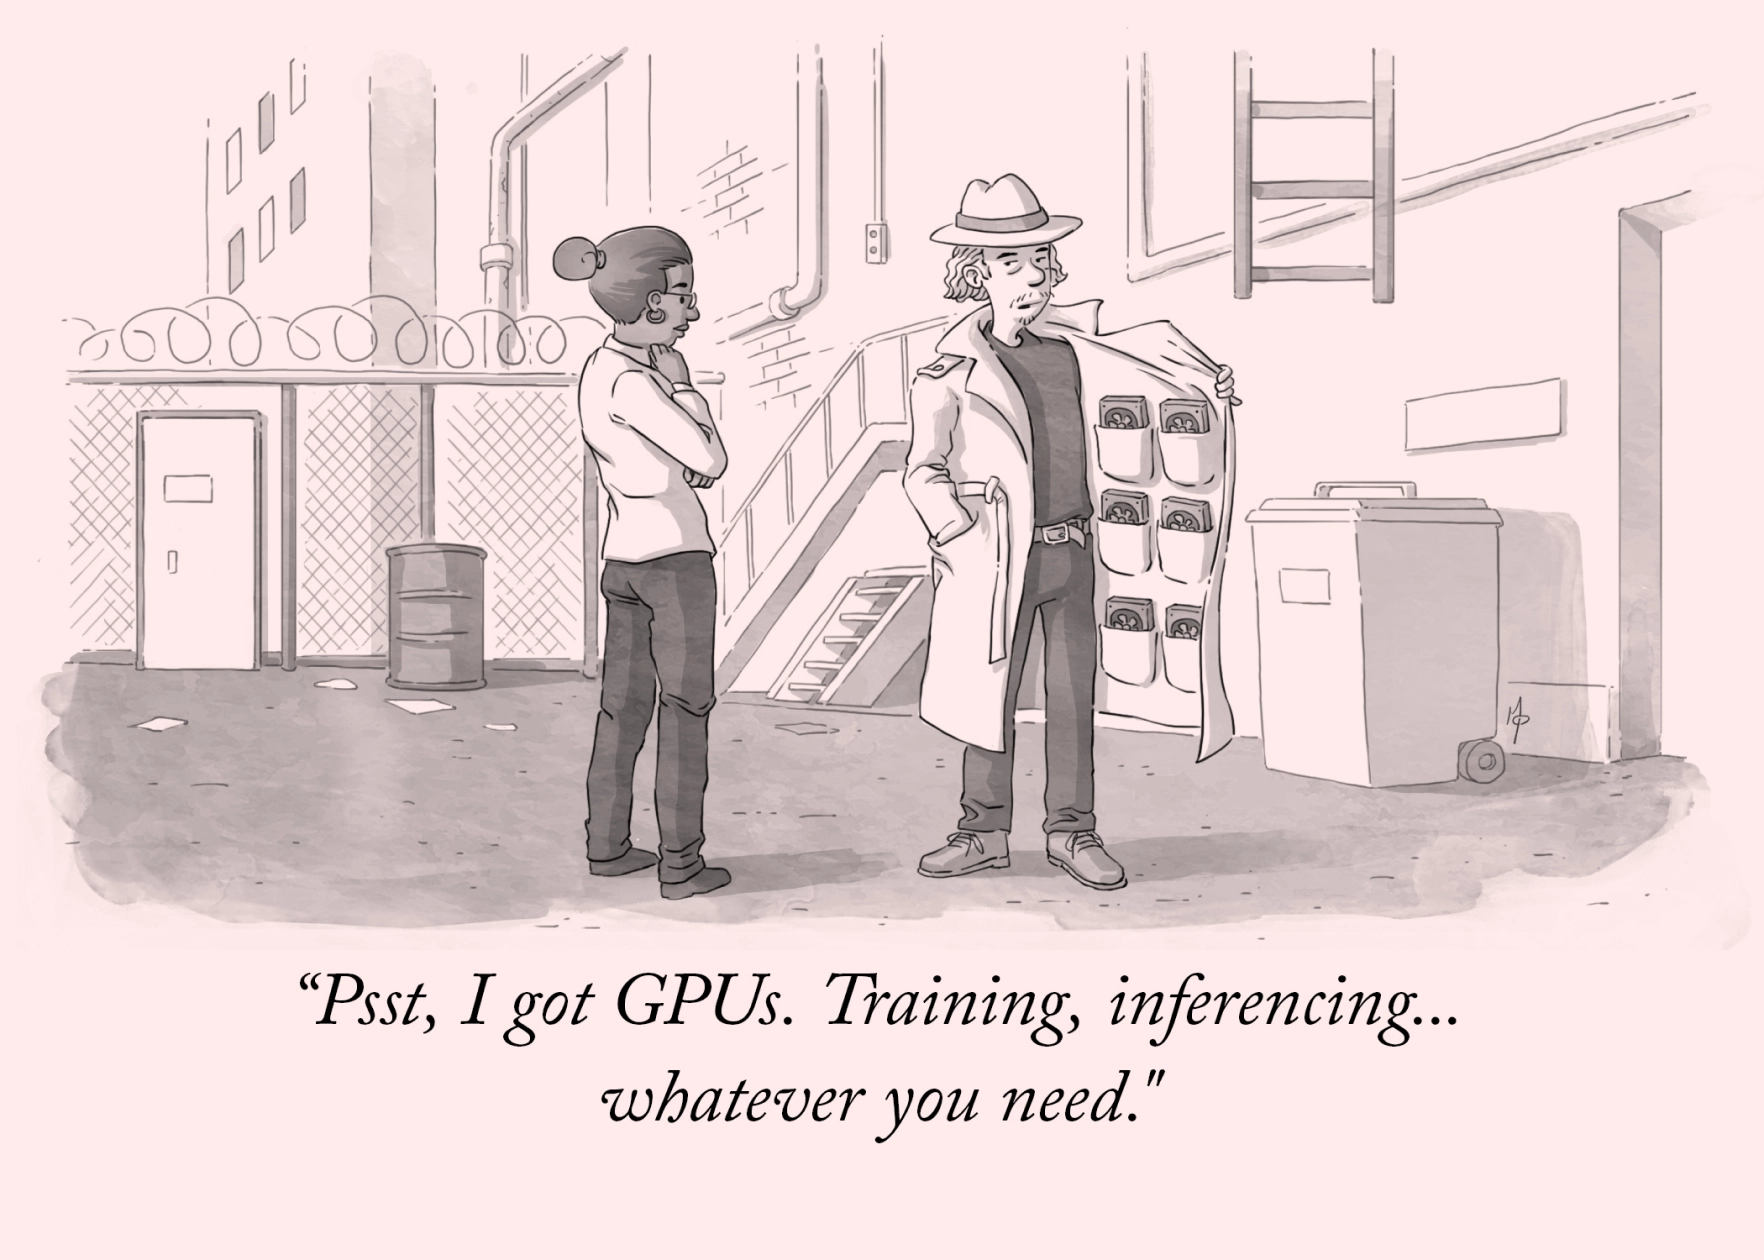 A cartoon-style illustration of a lady being offered to buy GPUs discreetly on the back alley. The seller is a man wearing a fedora and a long coat that has six pockets per side. He is showing 6 GPUs on his left side coat while saying: Psst, I got GPUs. Training, inferencing...whatever you need.